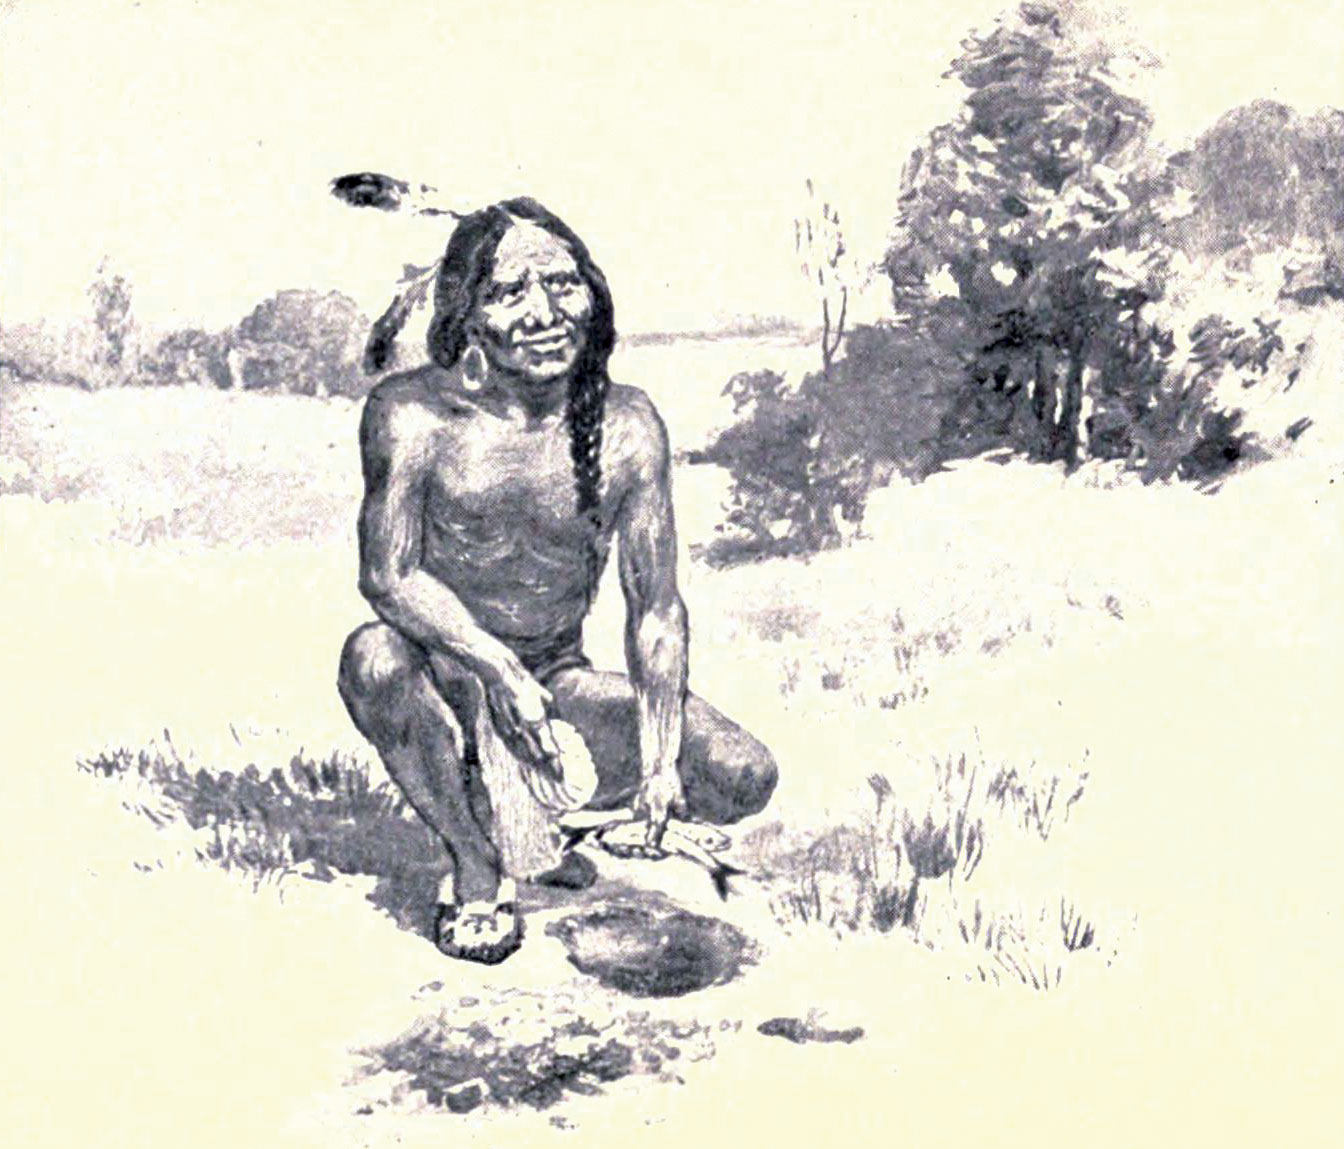 A drawing of the Native American diplomat, Squanto, teaching the Plymouth pilgrims how to fertilize their crops with fish.